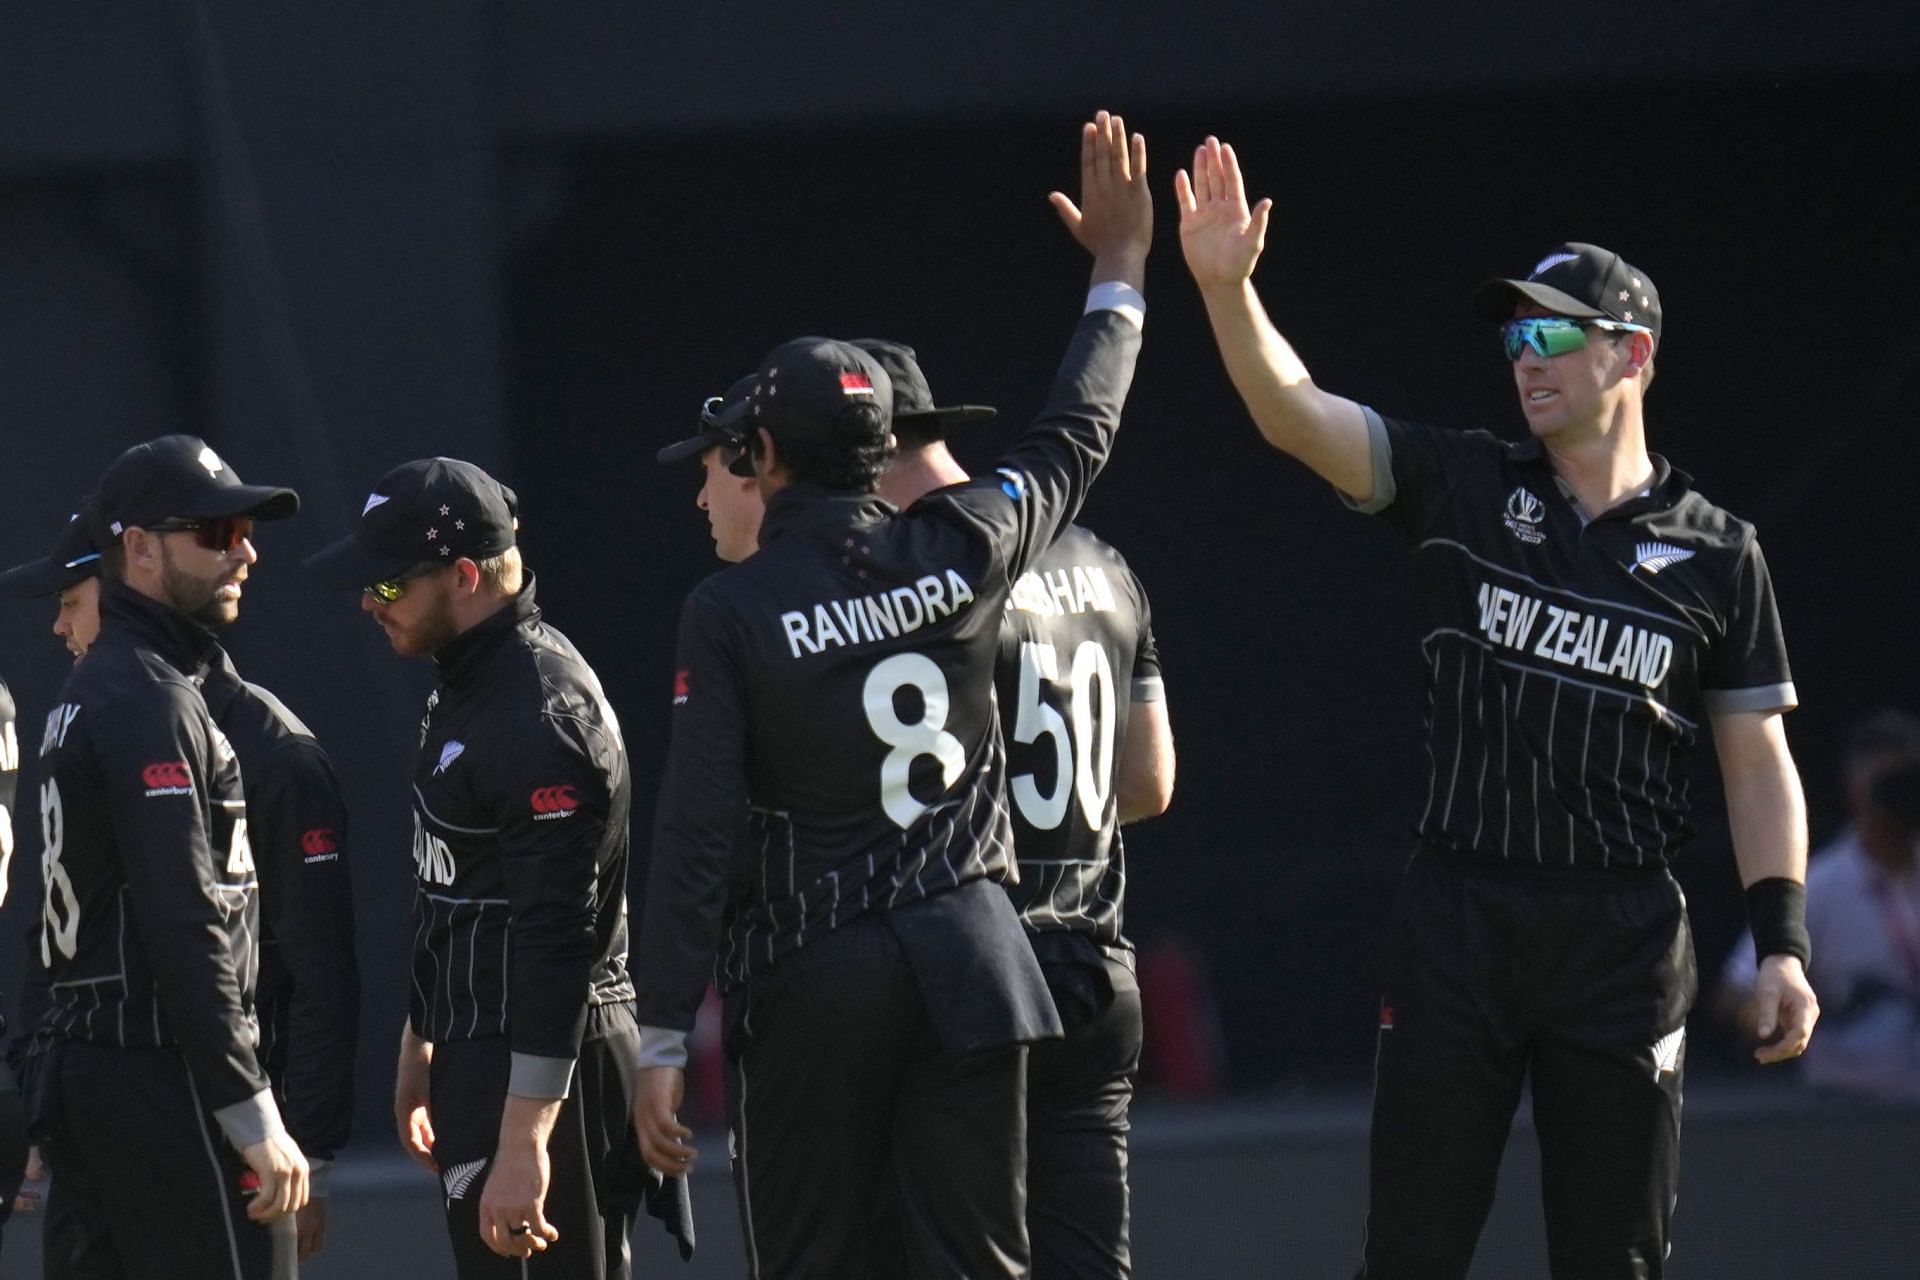 The Kiwis celebrate a wicket against England. (Pic: AP)